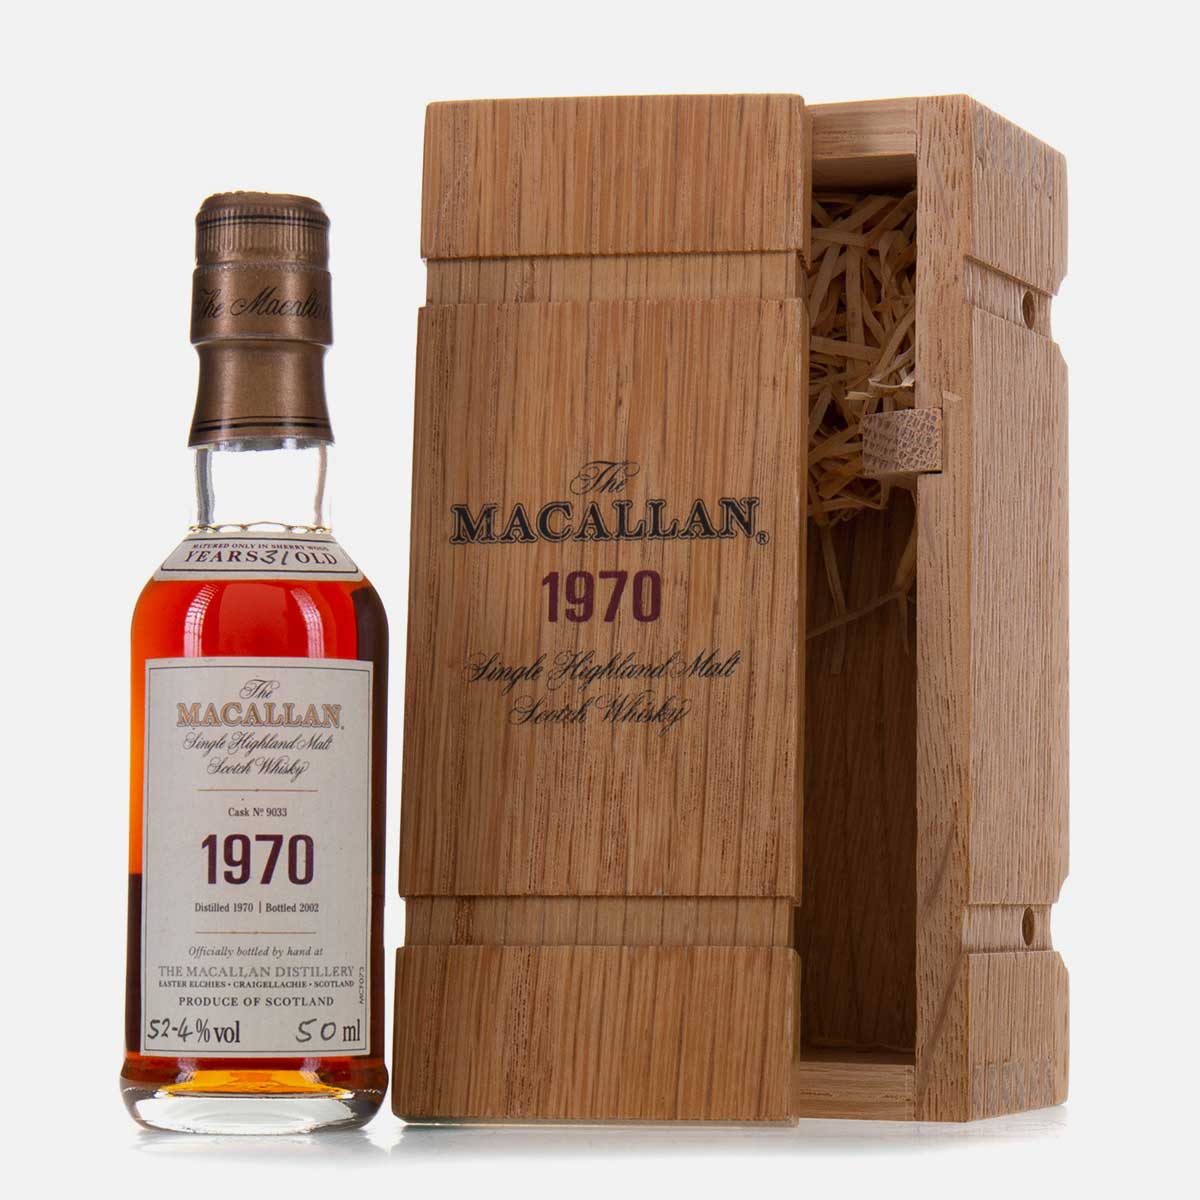 Mighty Macallan miniatures to star at whisky auction